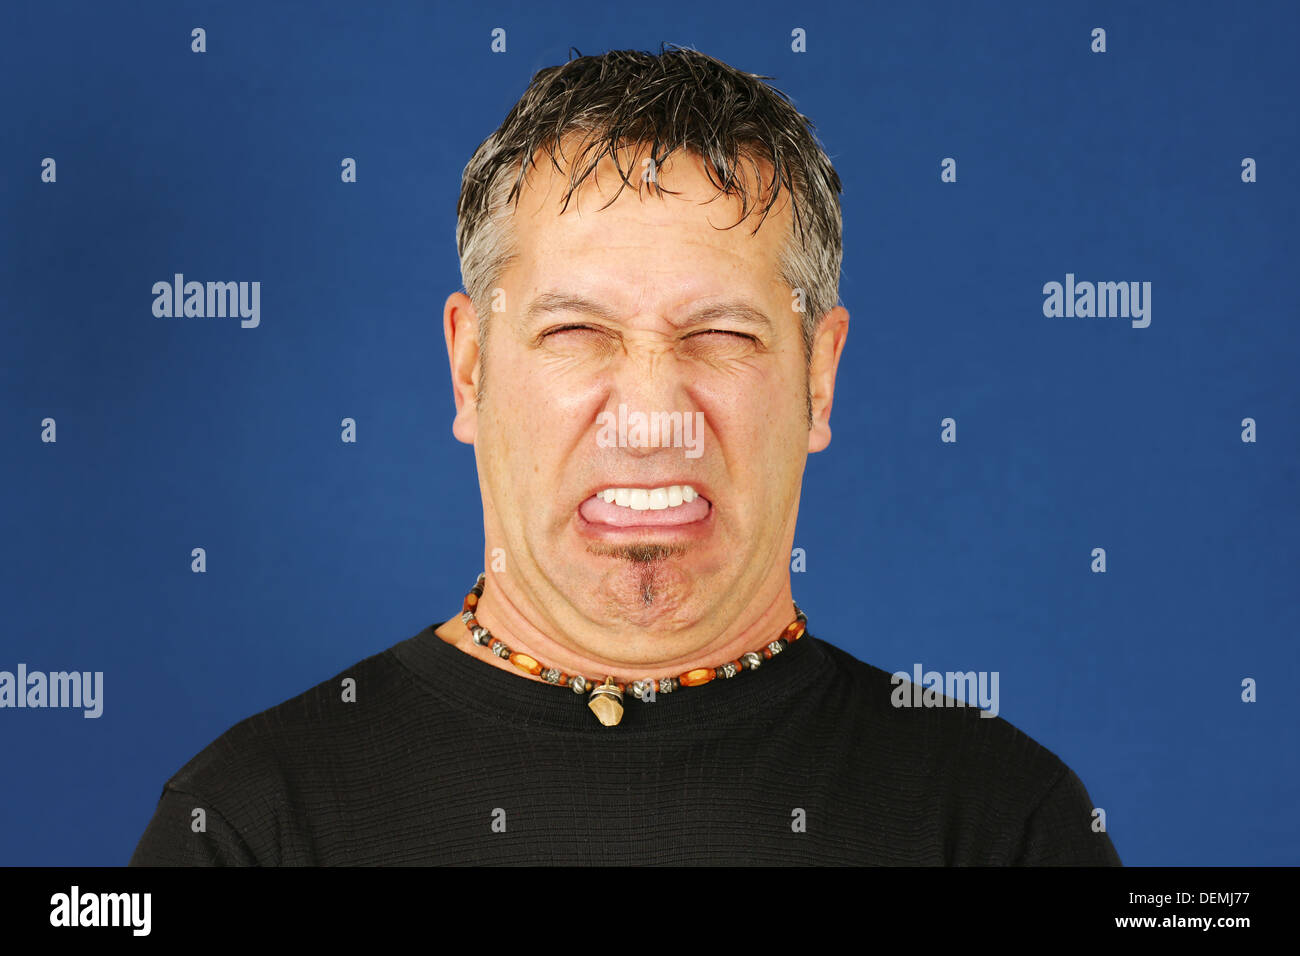 Man with funny disgusted face Stock Photo